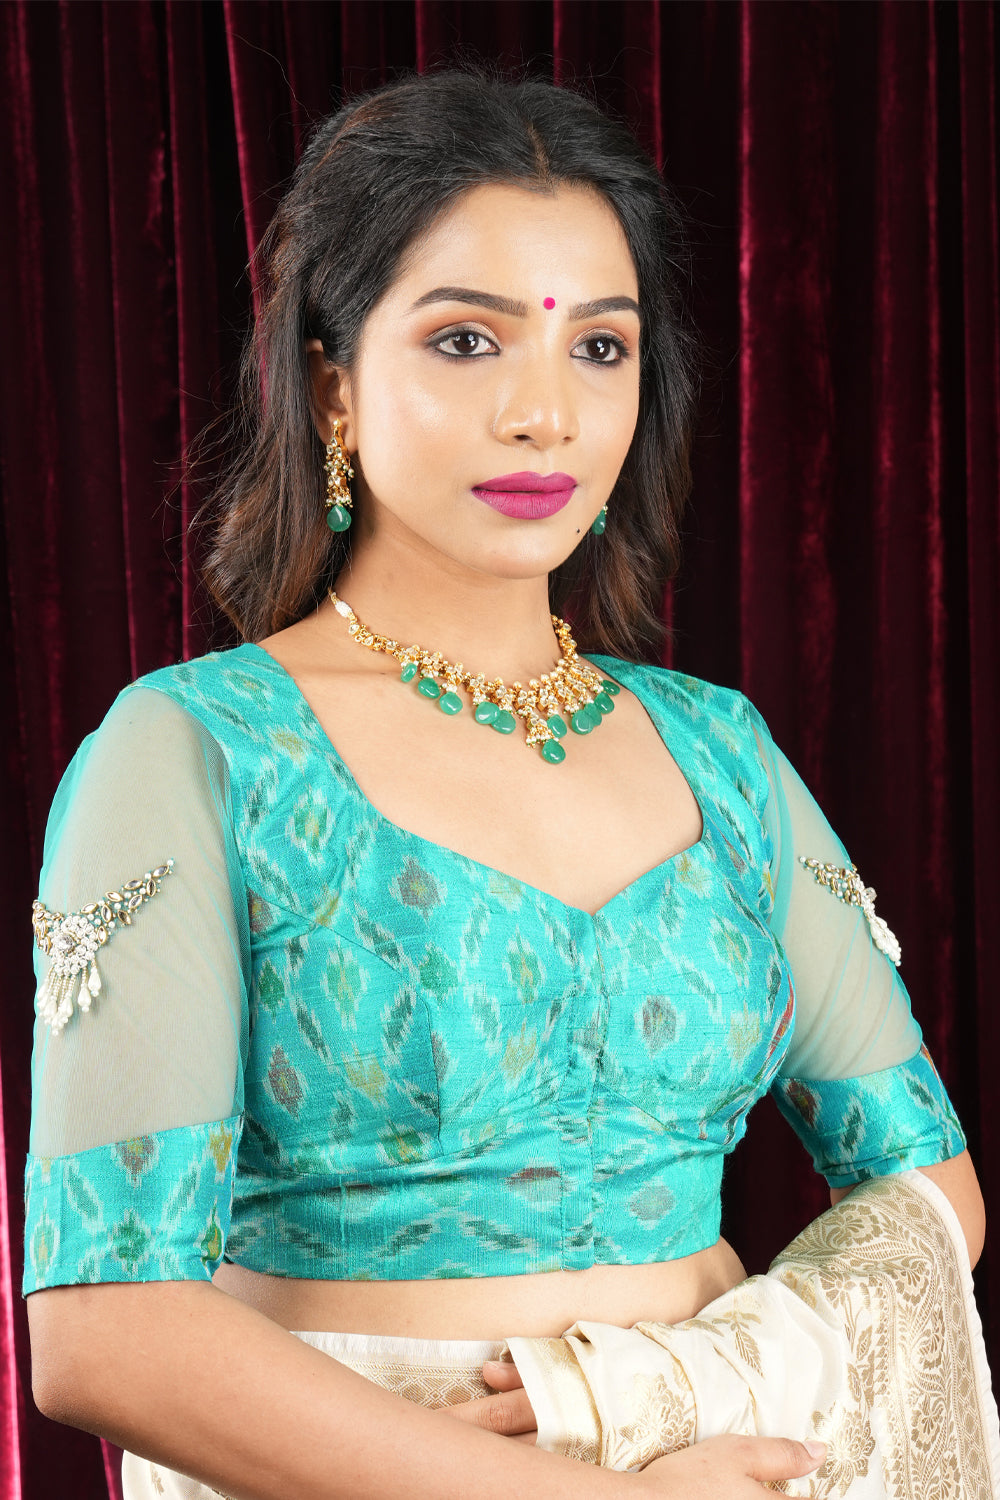 Elegant Teal Ikkat Blouse with Handcrafted Detailing and Sheer Net Sleeves